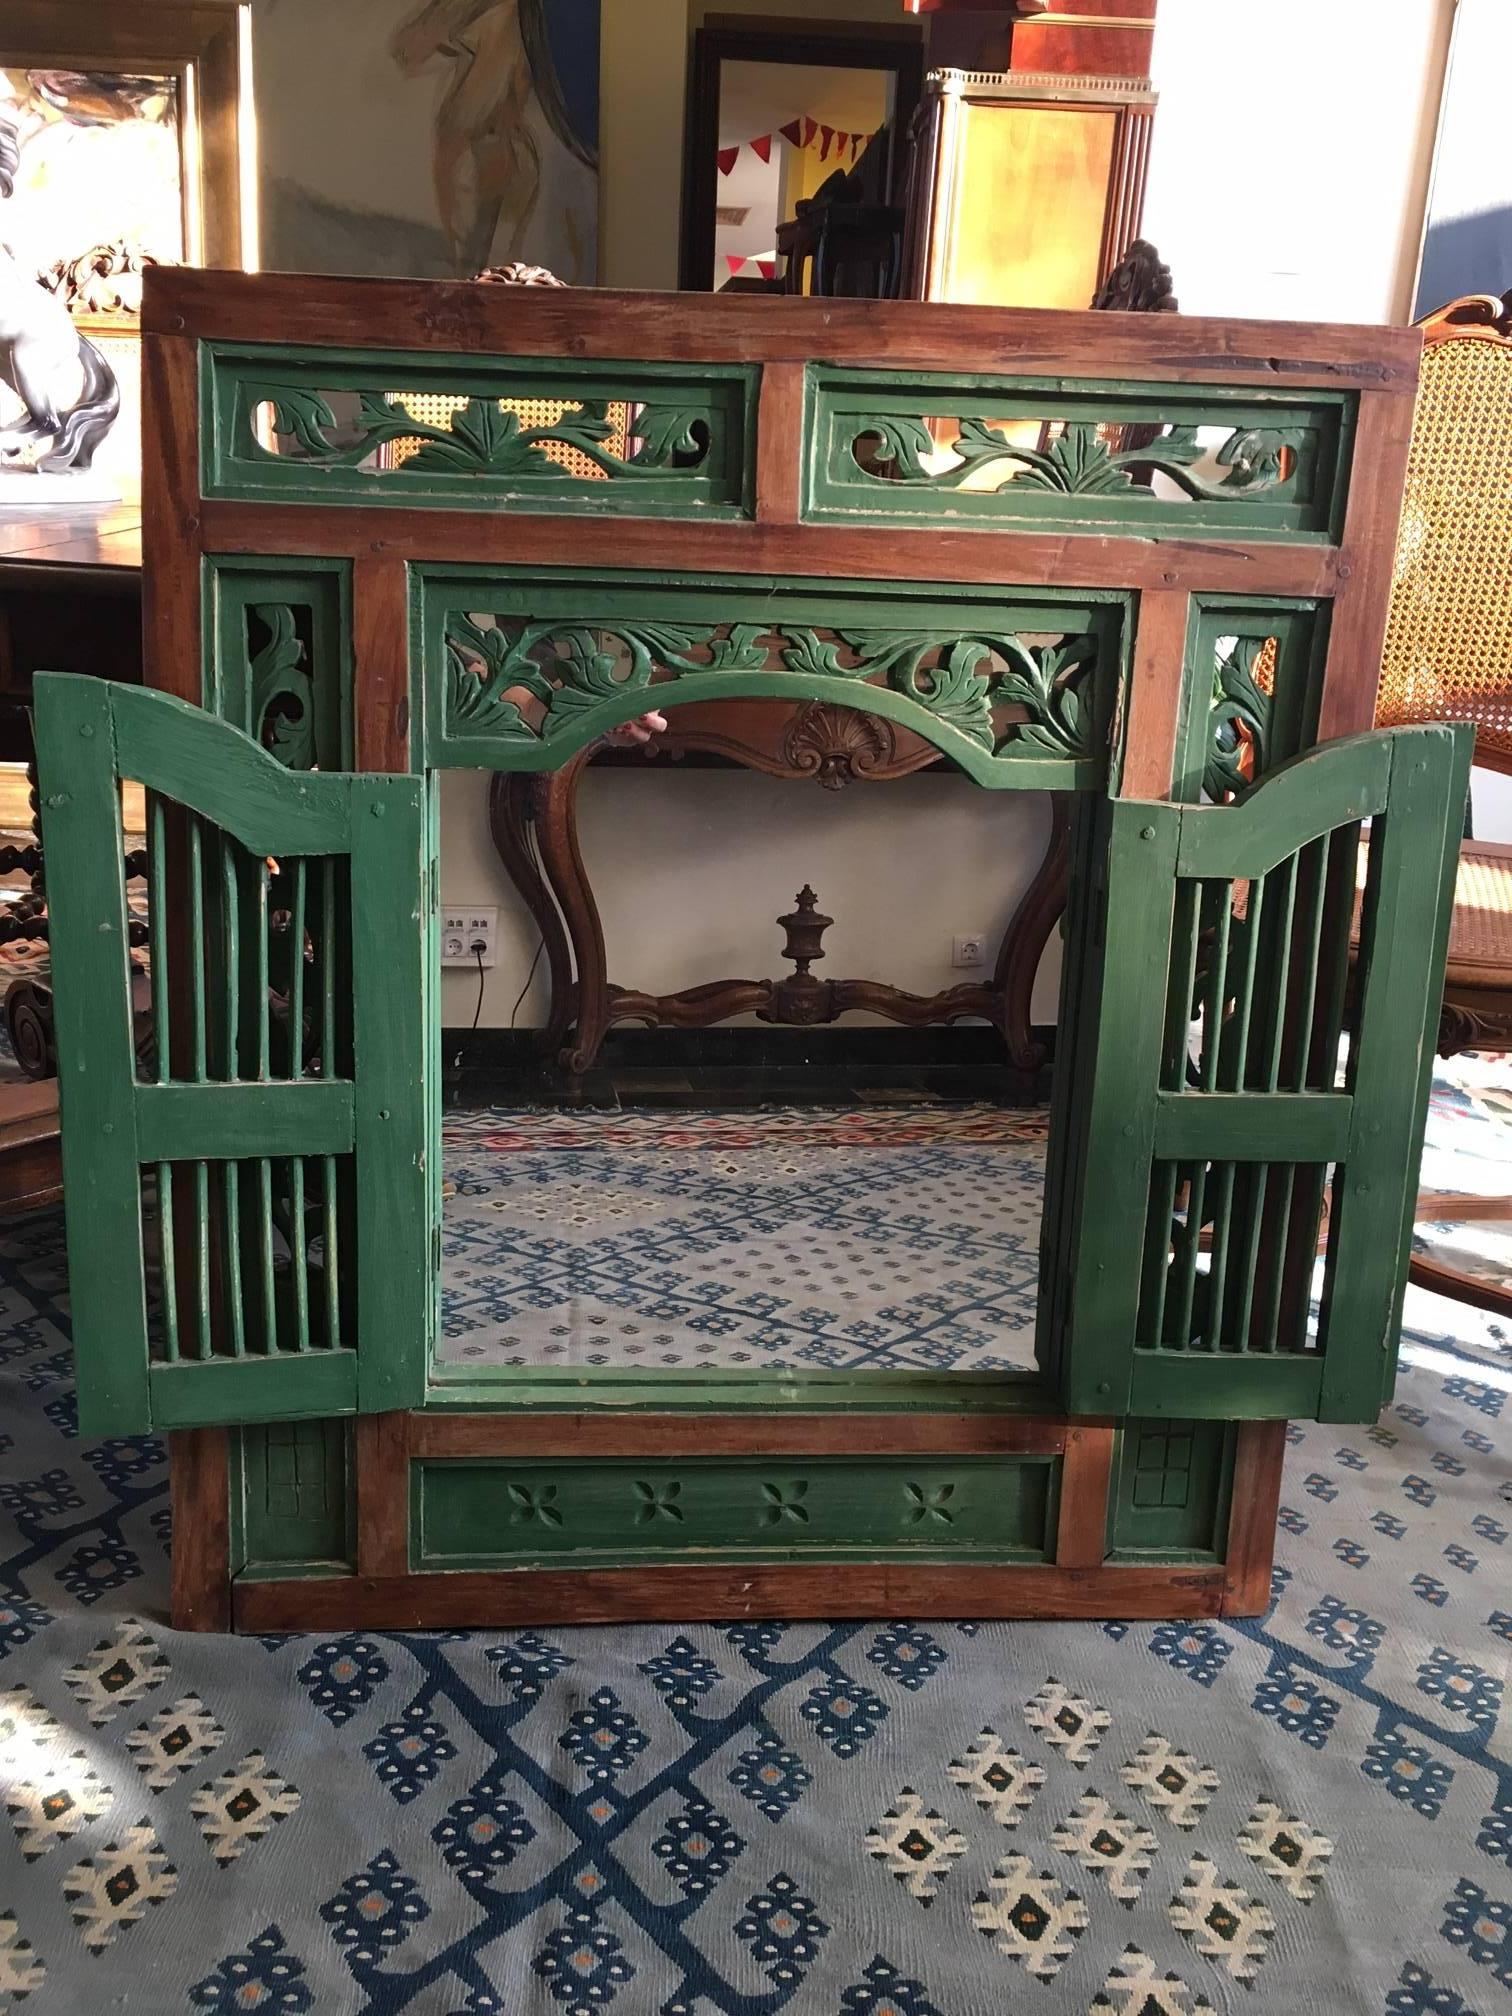 A mirror disguised behind a hand carved window frame, painted partially in dark green with antique finish.
Late 19th century.